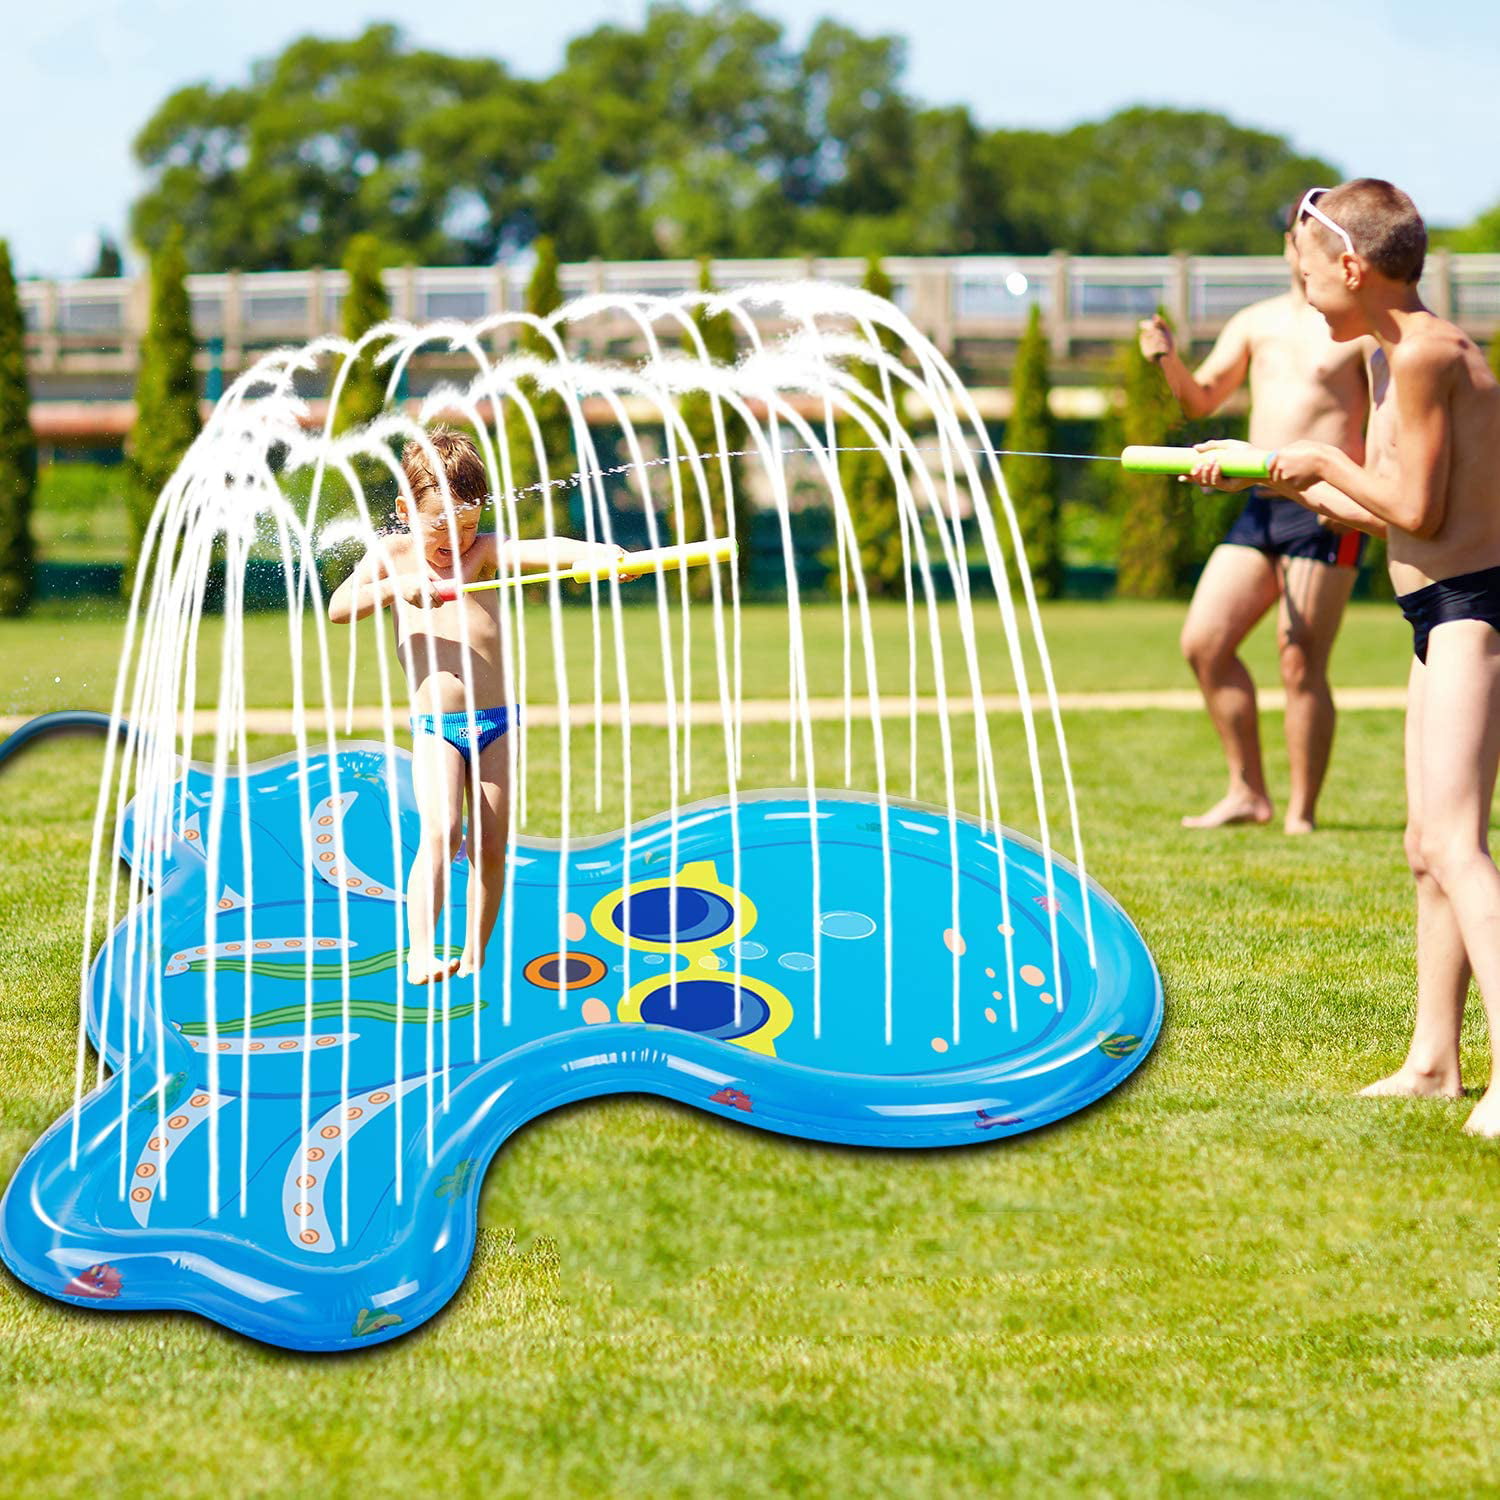 Splash Play Mat 68in-Diameter Perfect Inflatable Outdoor Sprinkler Pad Summer Fun Backyard Play for Infants Toddlers and Kids